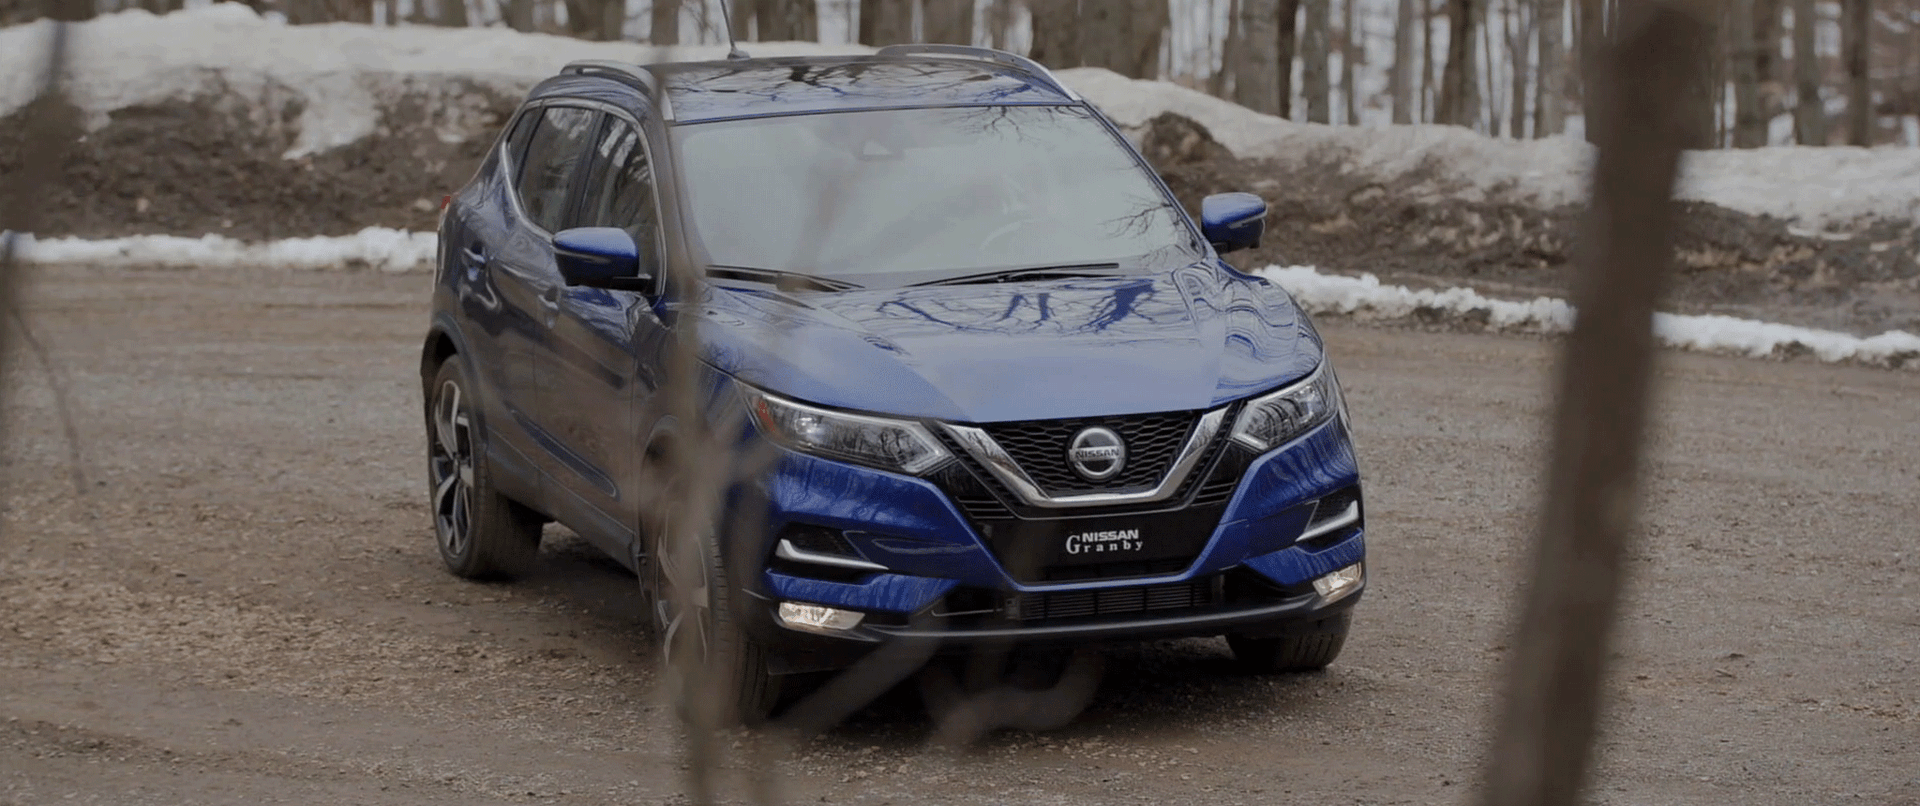 Groupe beaucage article nissan qashqai 2020 21 1